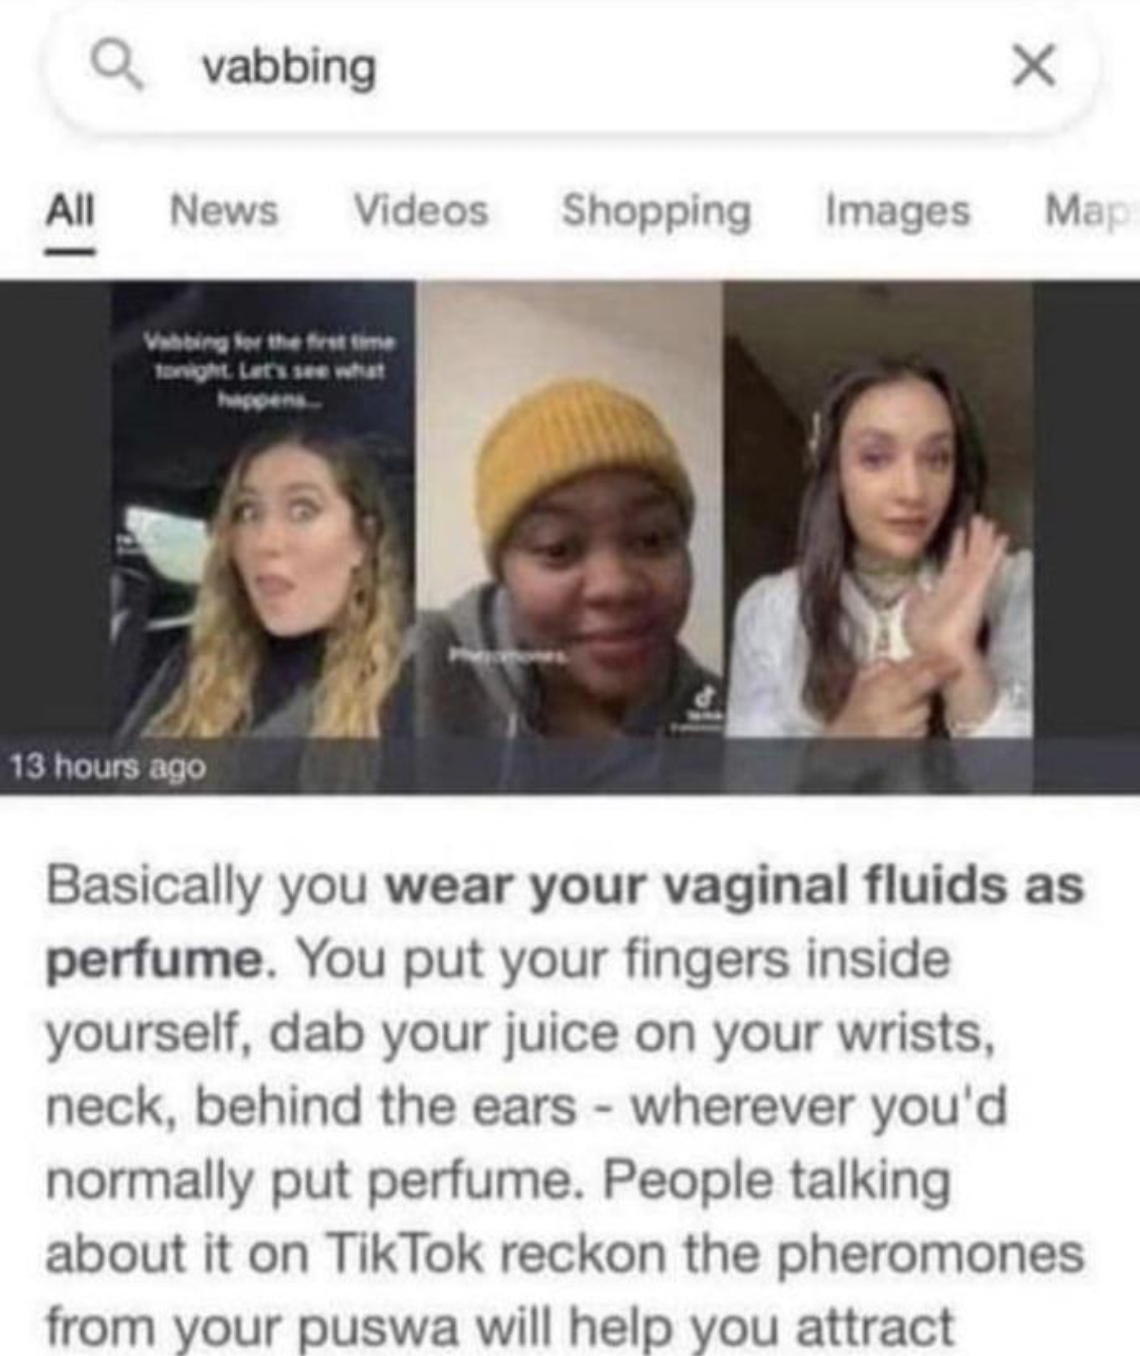 Funny Facepalms and Fails - All News Vabbing for the first time tonight Let's see what 13 hours ago X Videos Shopping Images Map Basically you wear your vaginal fluids as perfume. You put your fingers inside yourself, dab your juice on your wrists, neck,